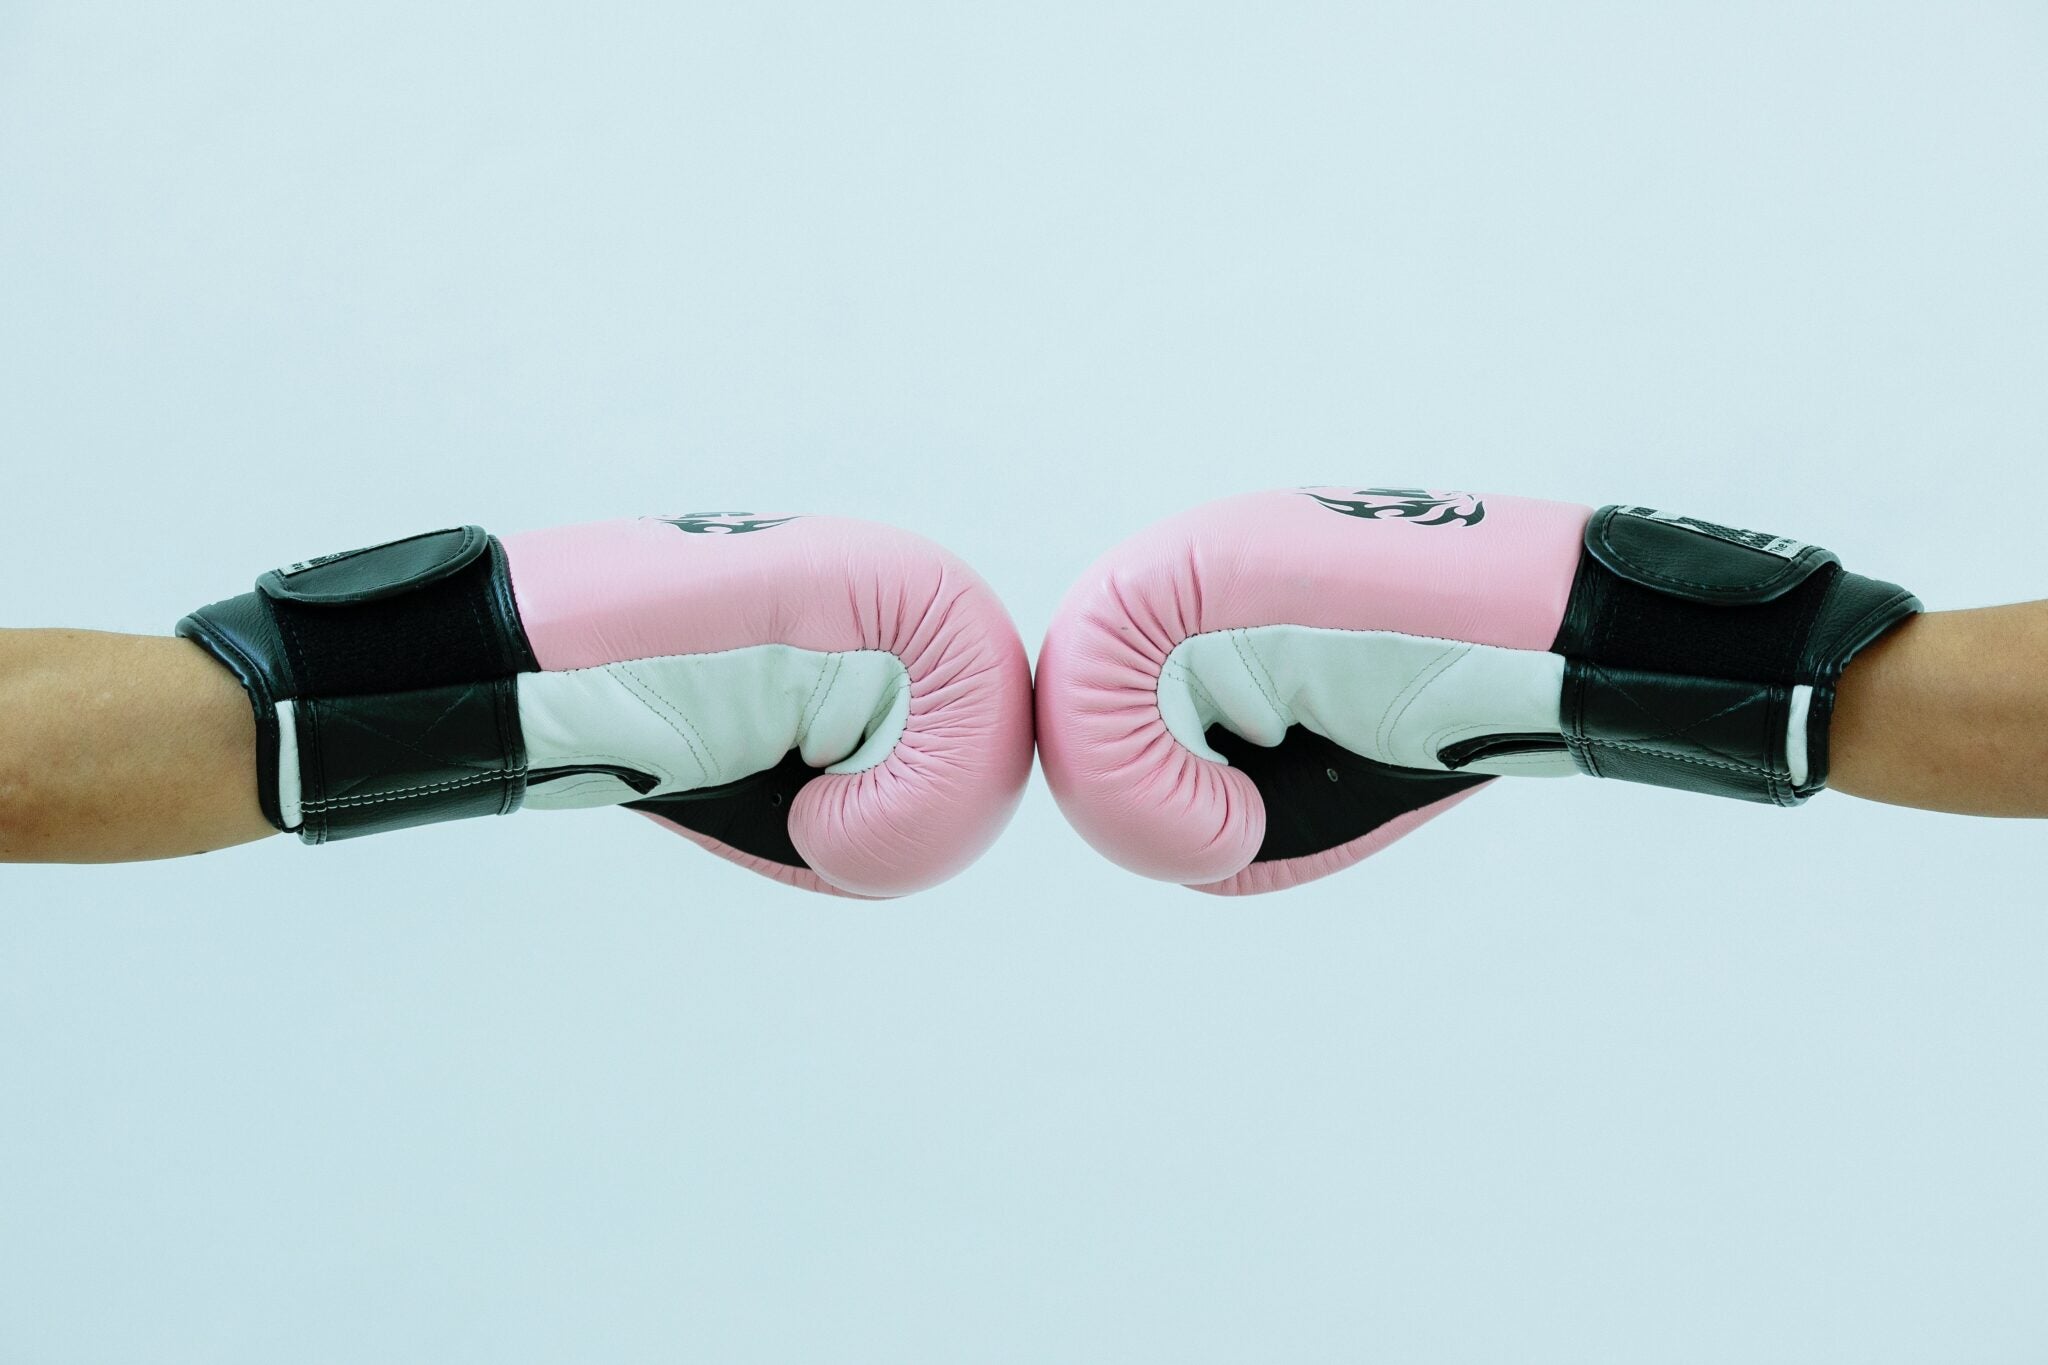 How to Get Started with Boxing: The Beginner's Guide